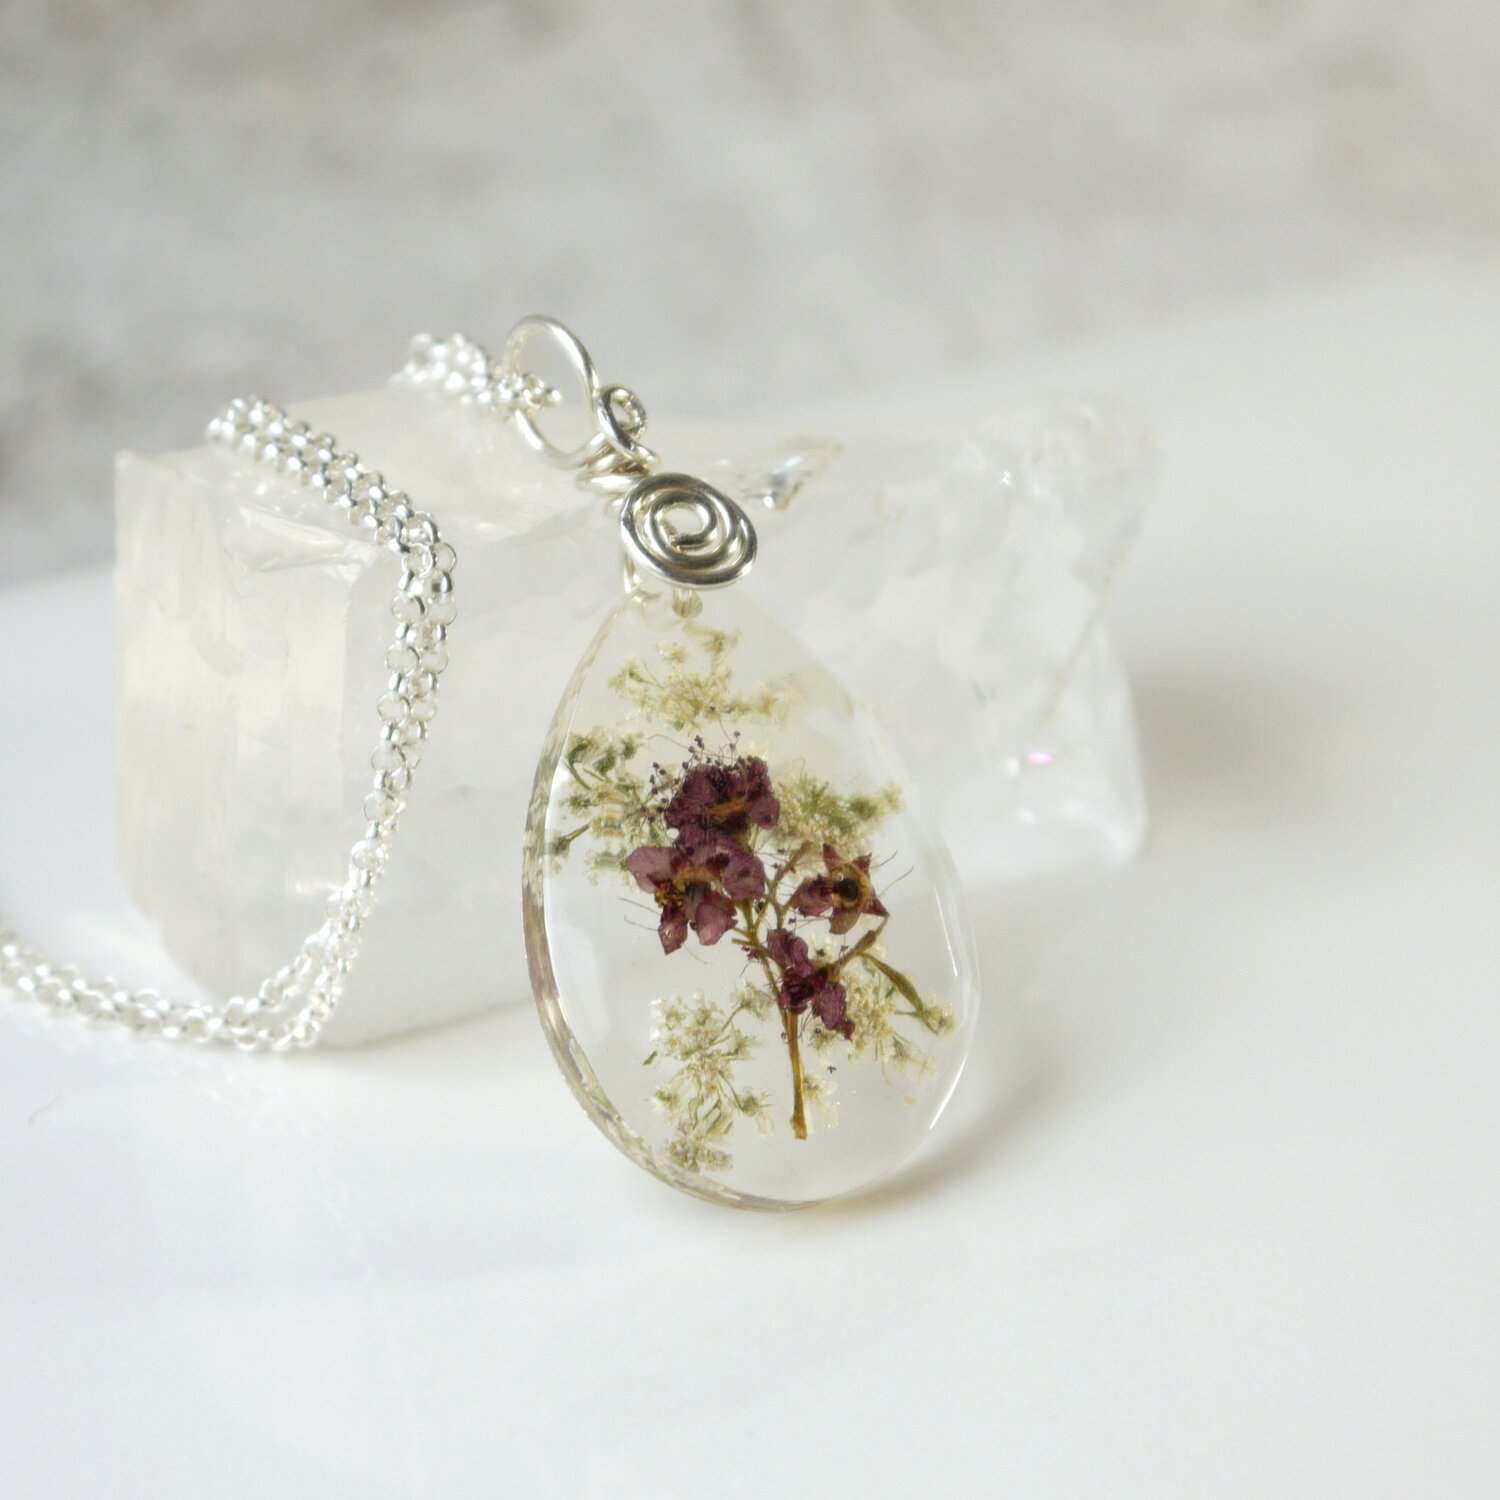 Gold flower pendant Jewelry flowers real resin Women/'s oval pendant necklace dried real white flowers pressed into resin Unique gift